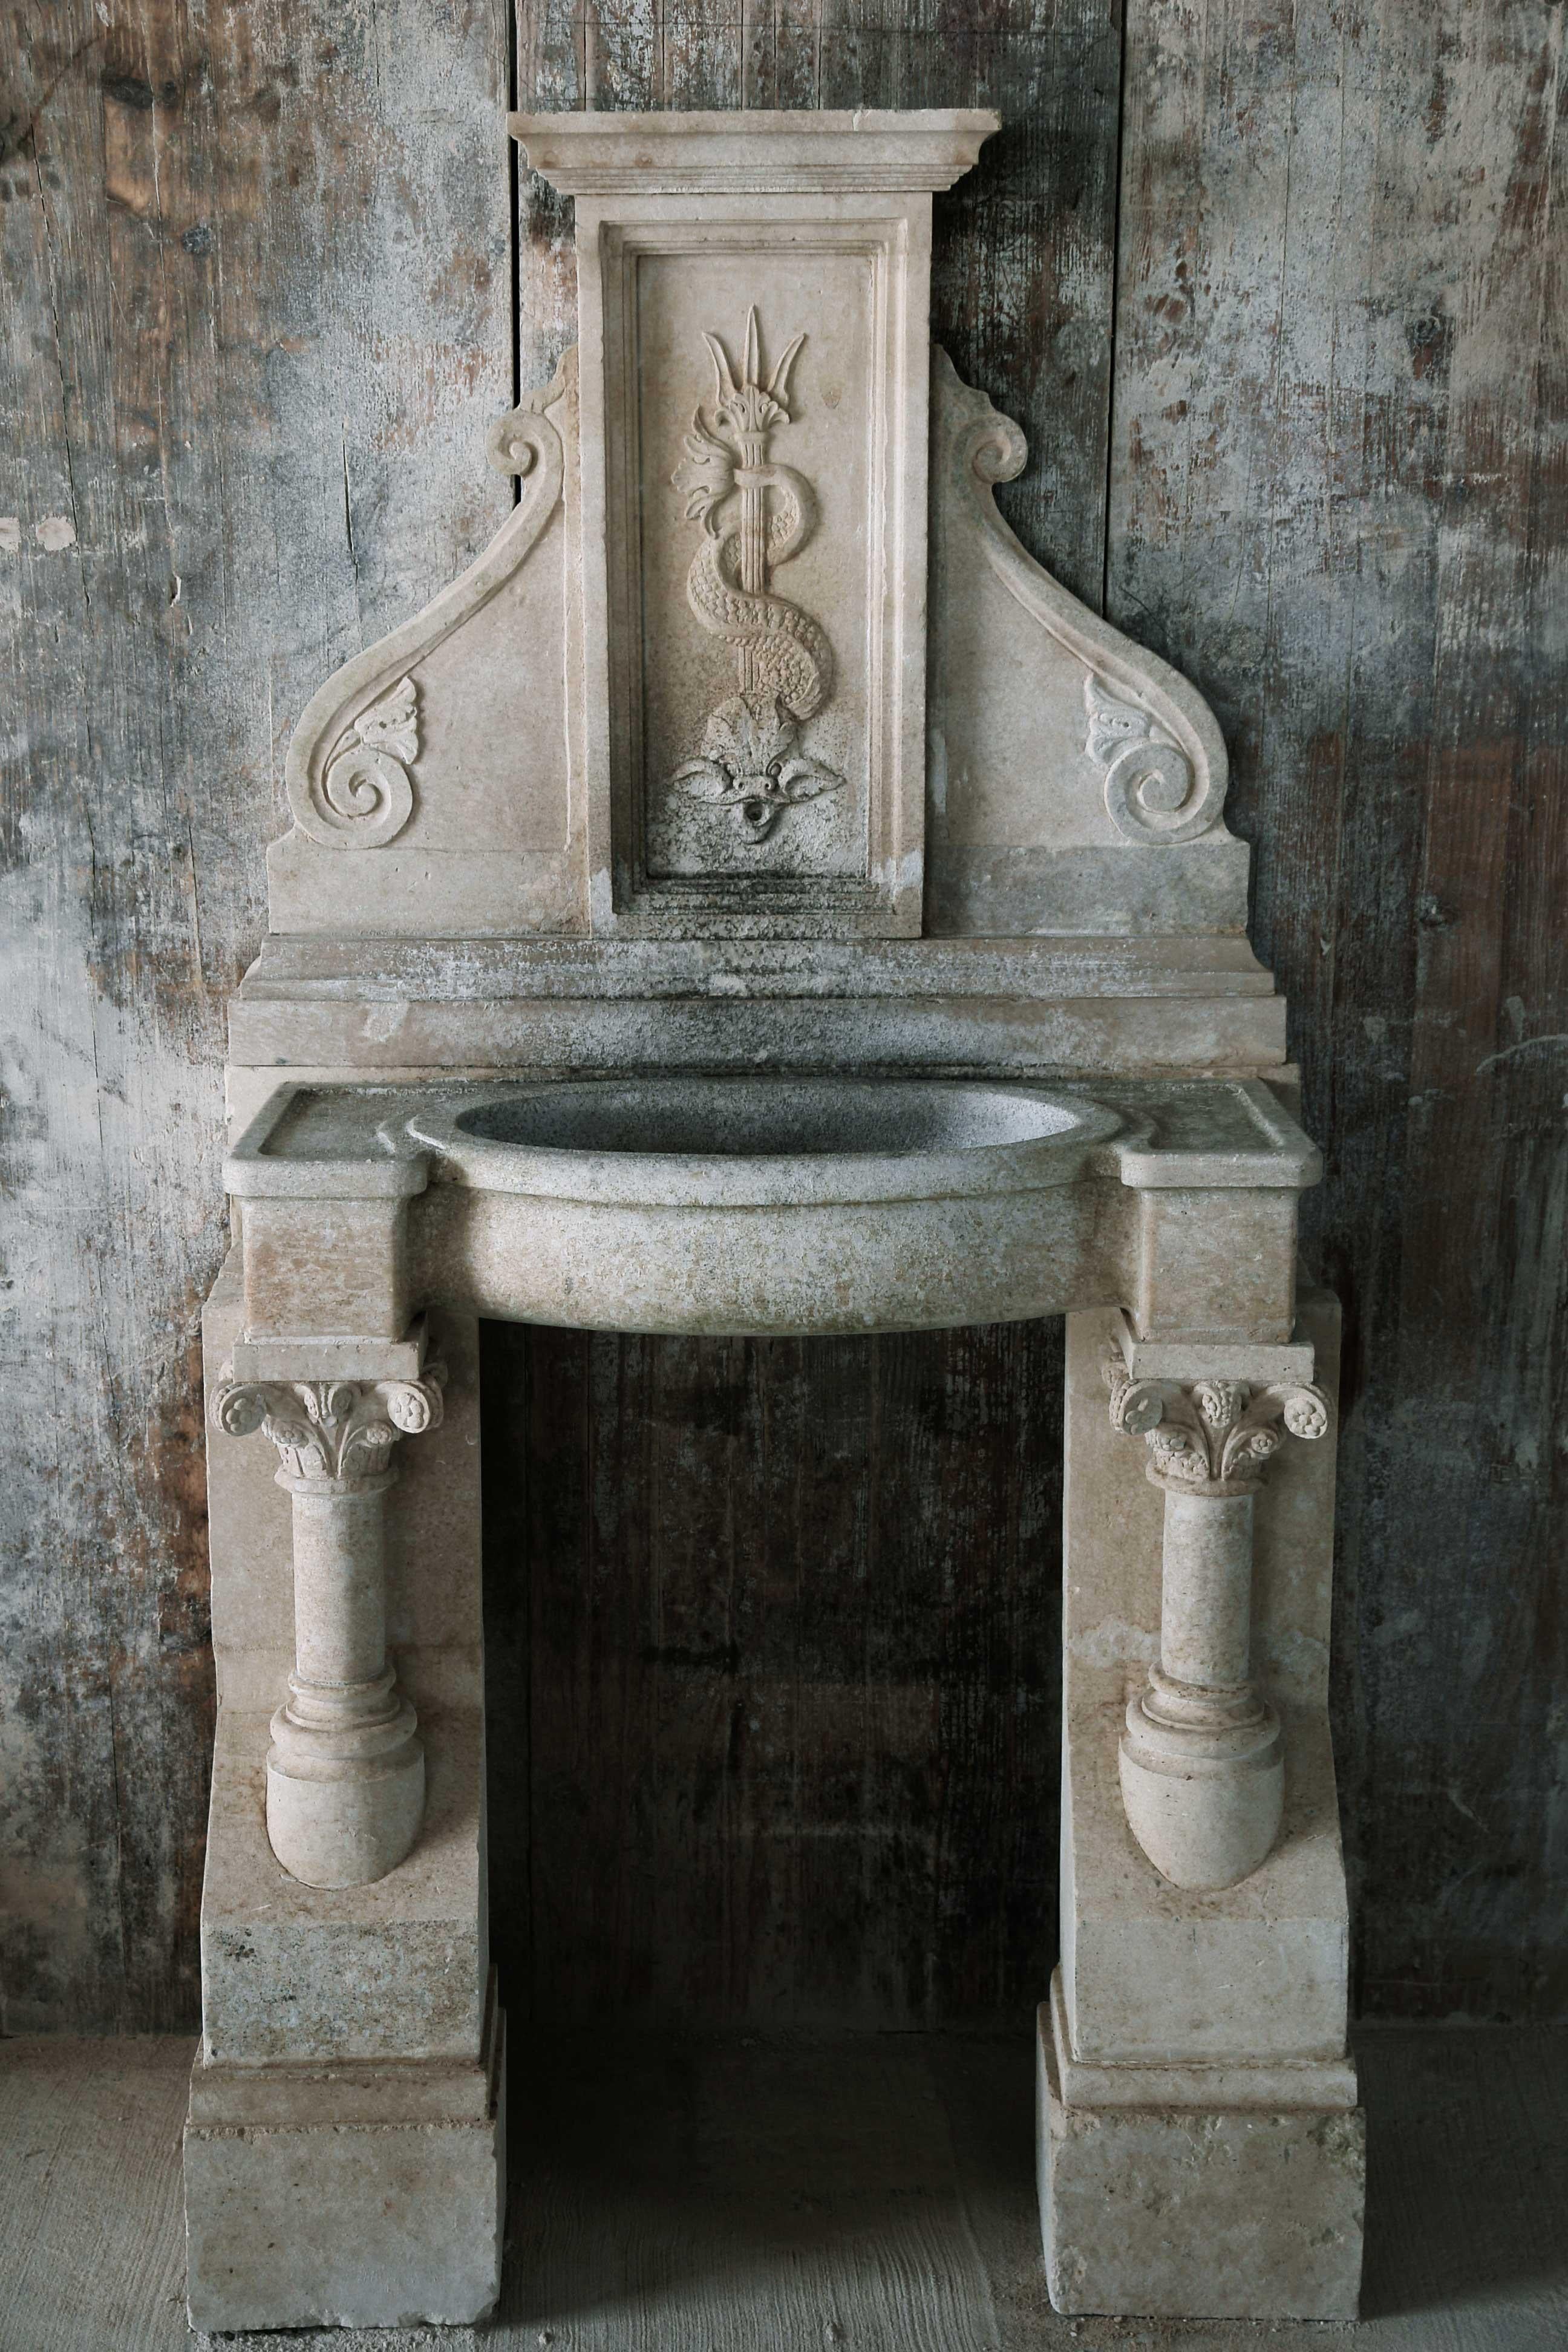 A rare quality Italian Renaissance style wall fountain, hand-carved in pure limestone with antique patina, excellent quality of art work, with columns on side incorporated in each leg.
More info on demand.
